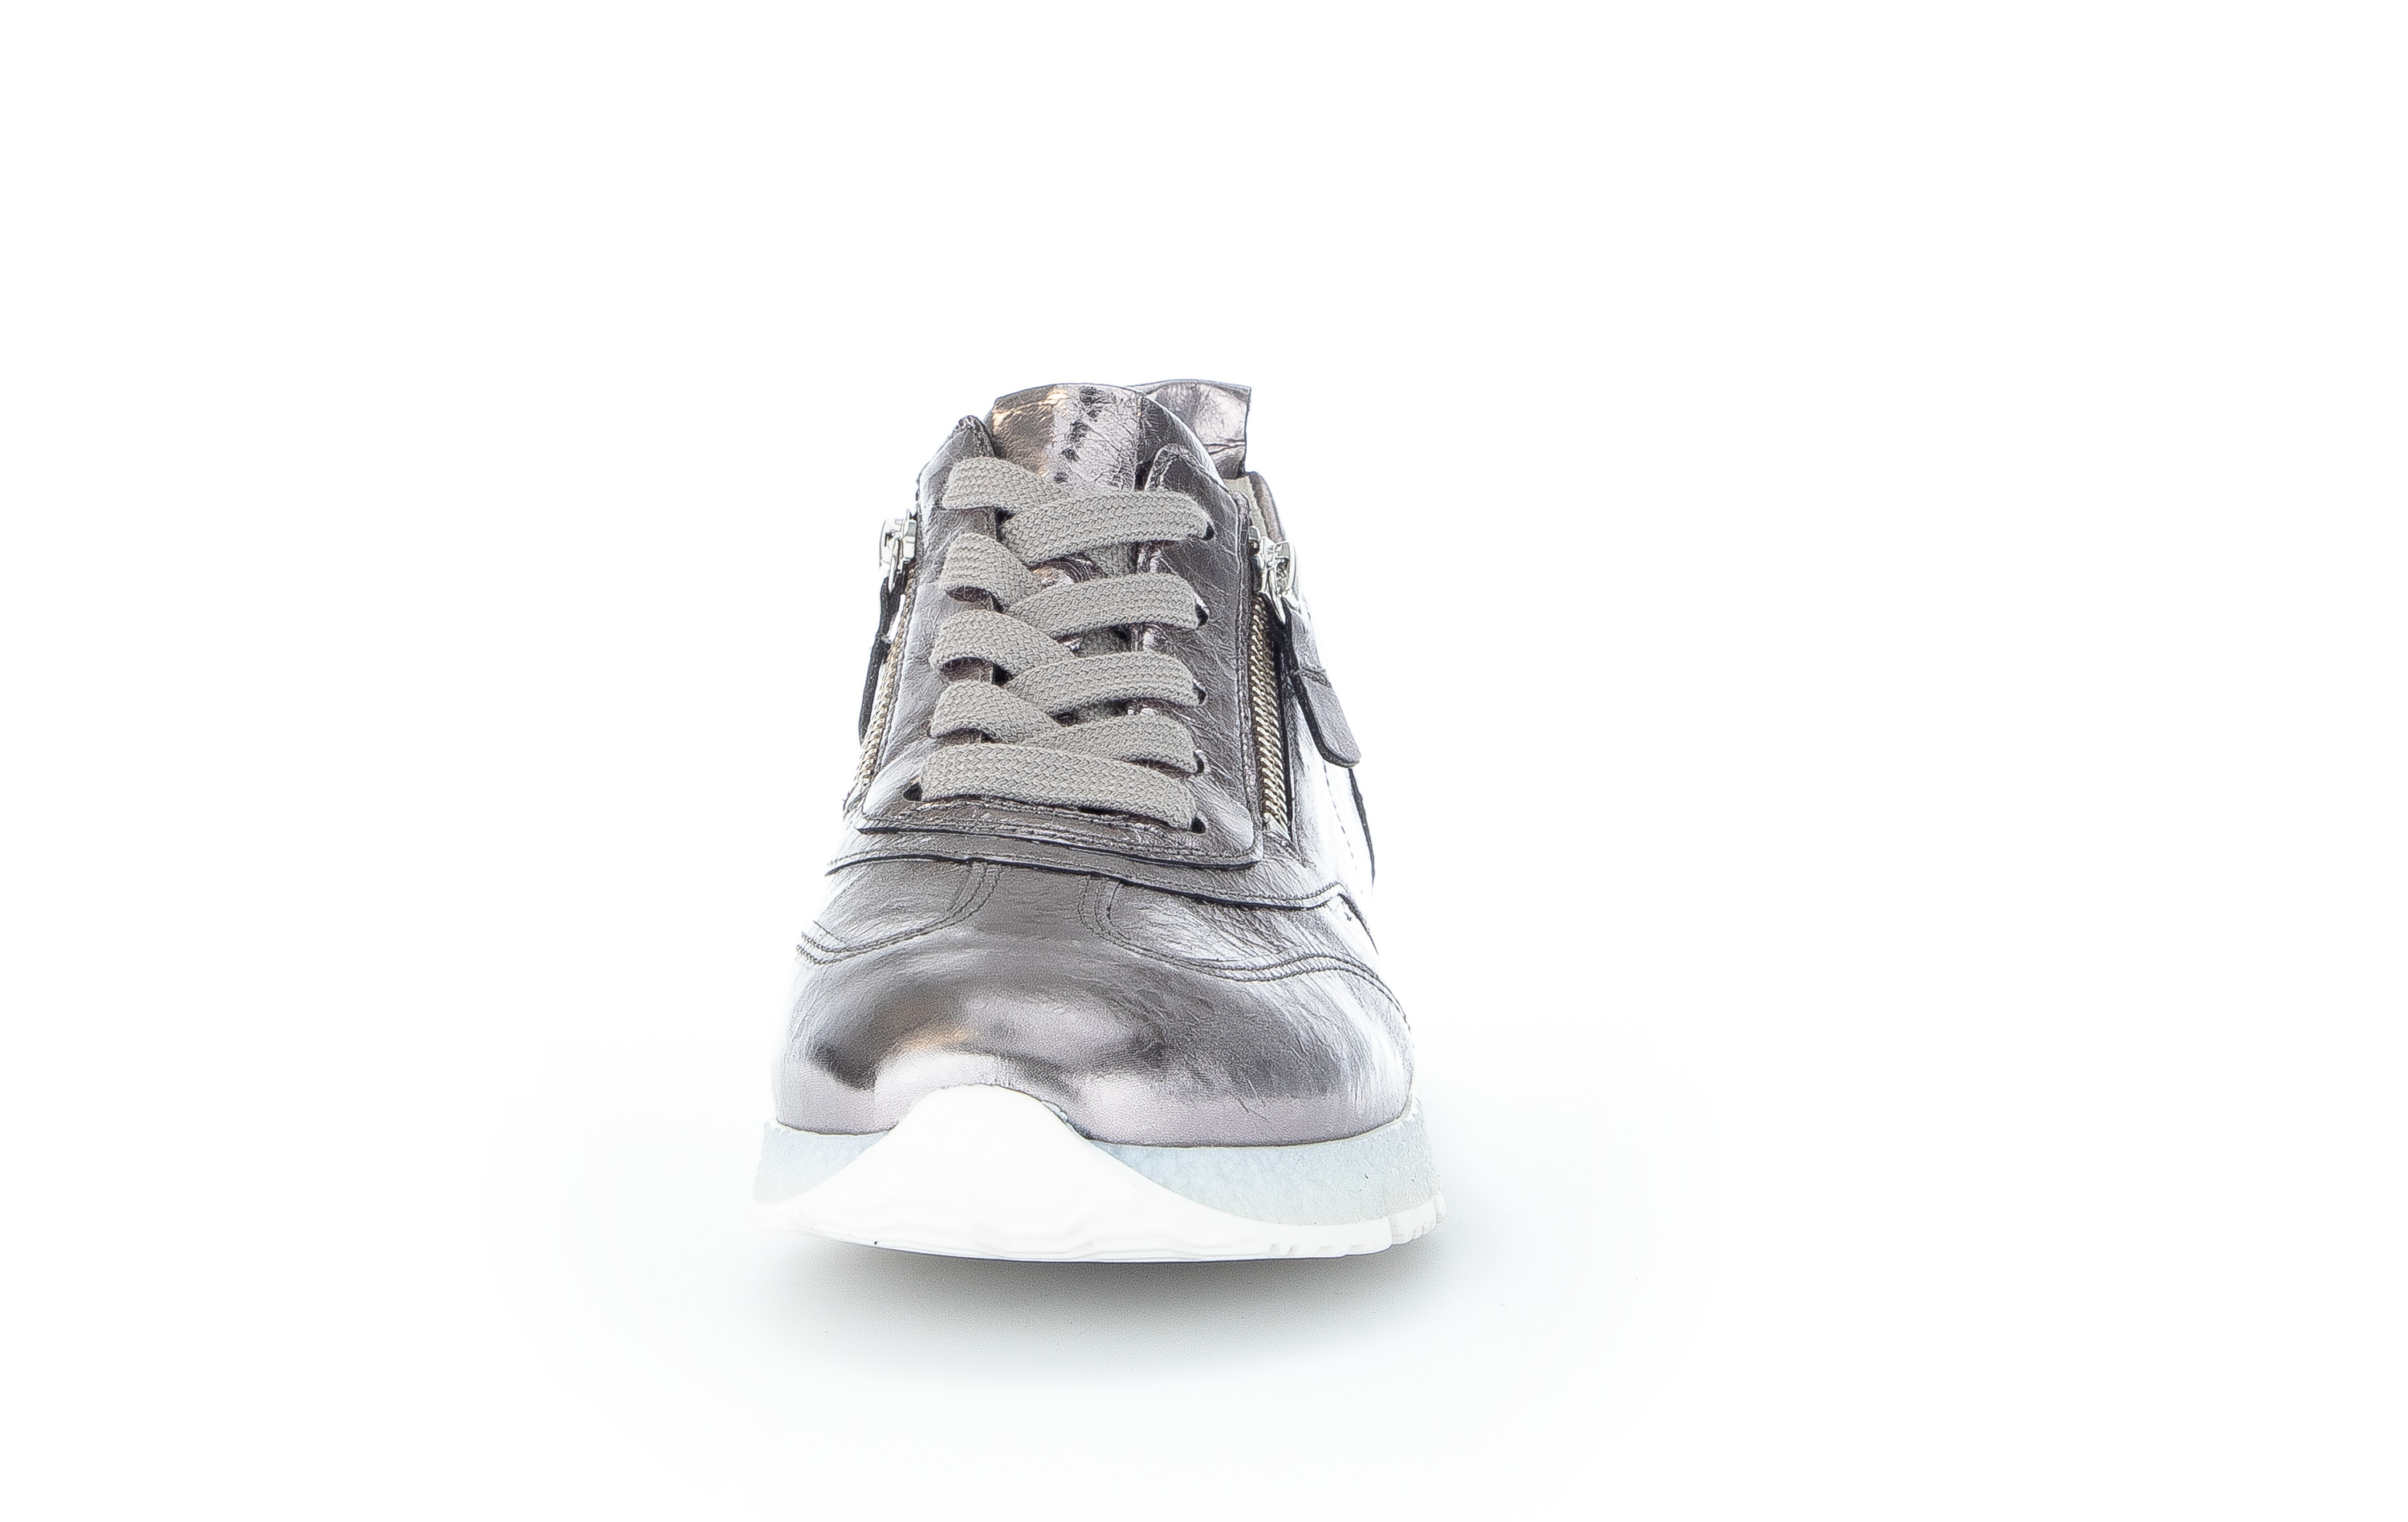 Gabor Shoes Sneaker Silver smooth leather